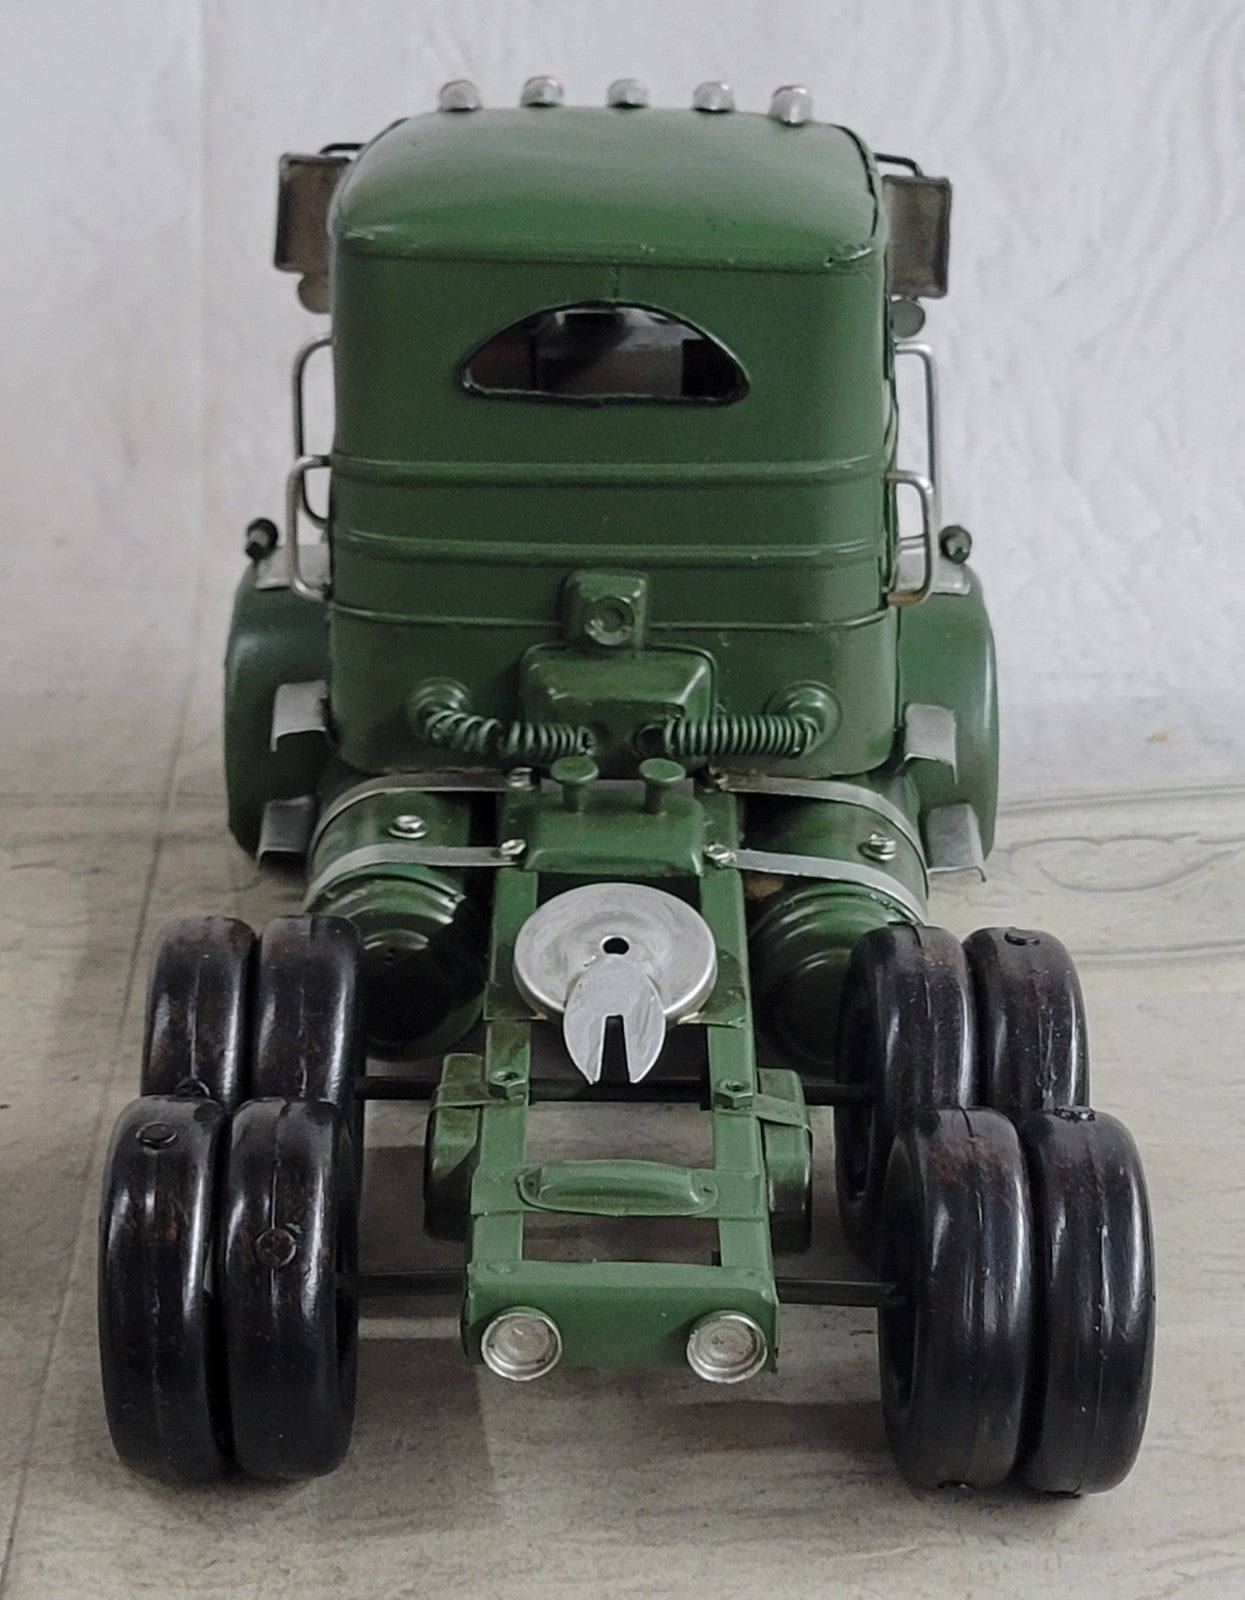 Vintage Home Decor Retro Truck Iron Toy Antique Truck Models For Decoration Gift